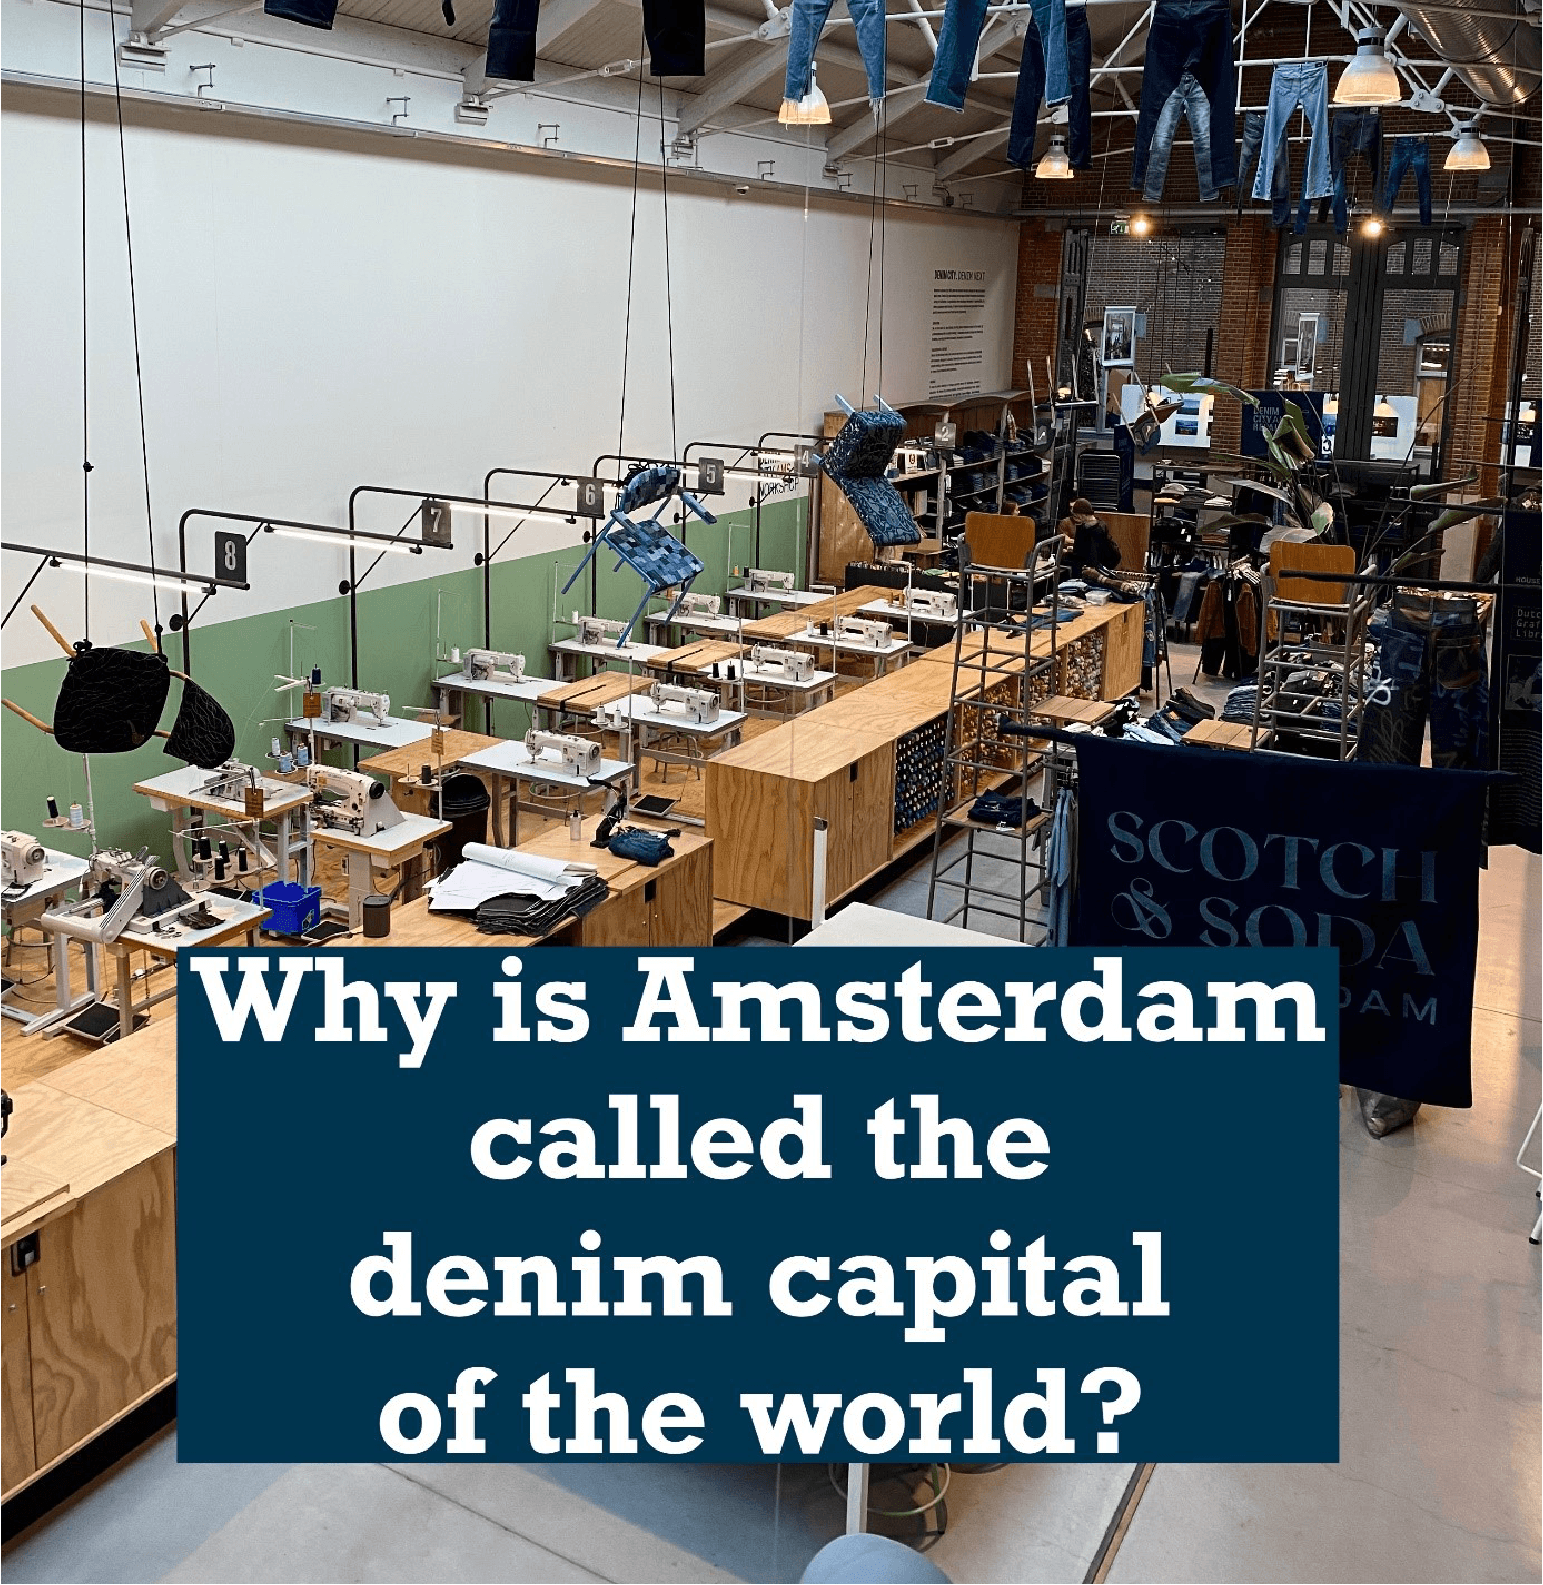 Why is Amsterdam called the denim capital of the world?